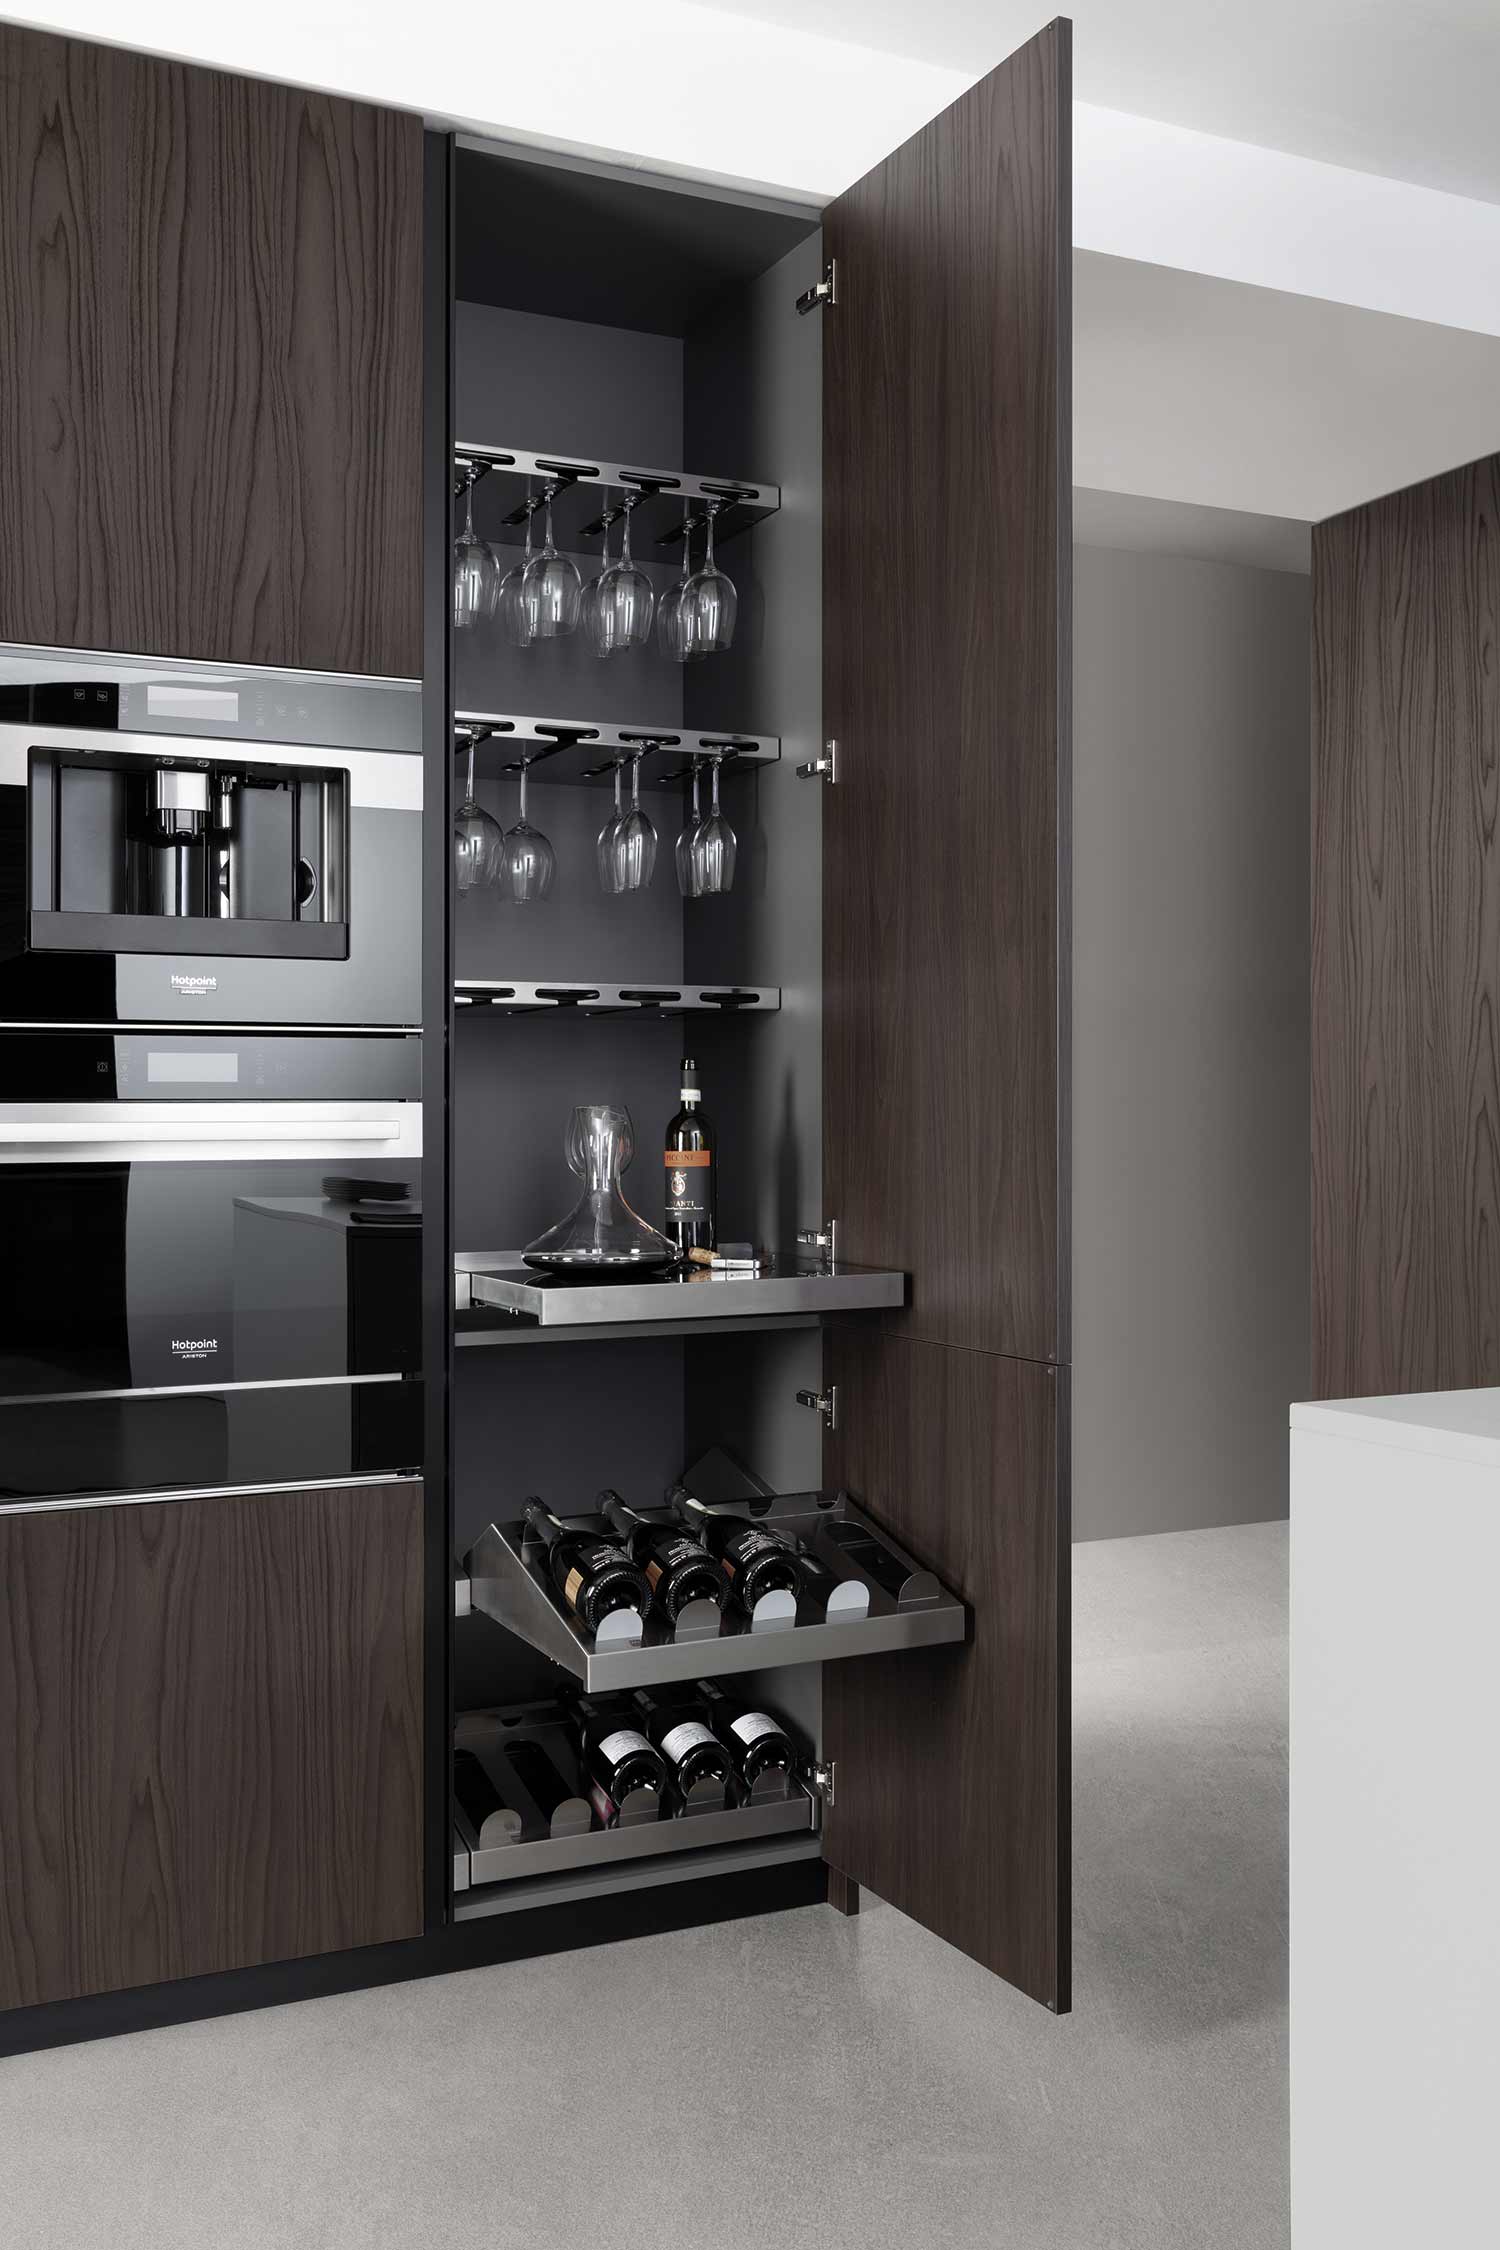 Wine glass holders , pouring table and pull-out bottle racks all equipped within the kitchen talll unit.